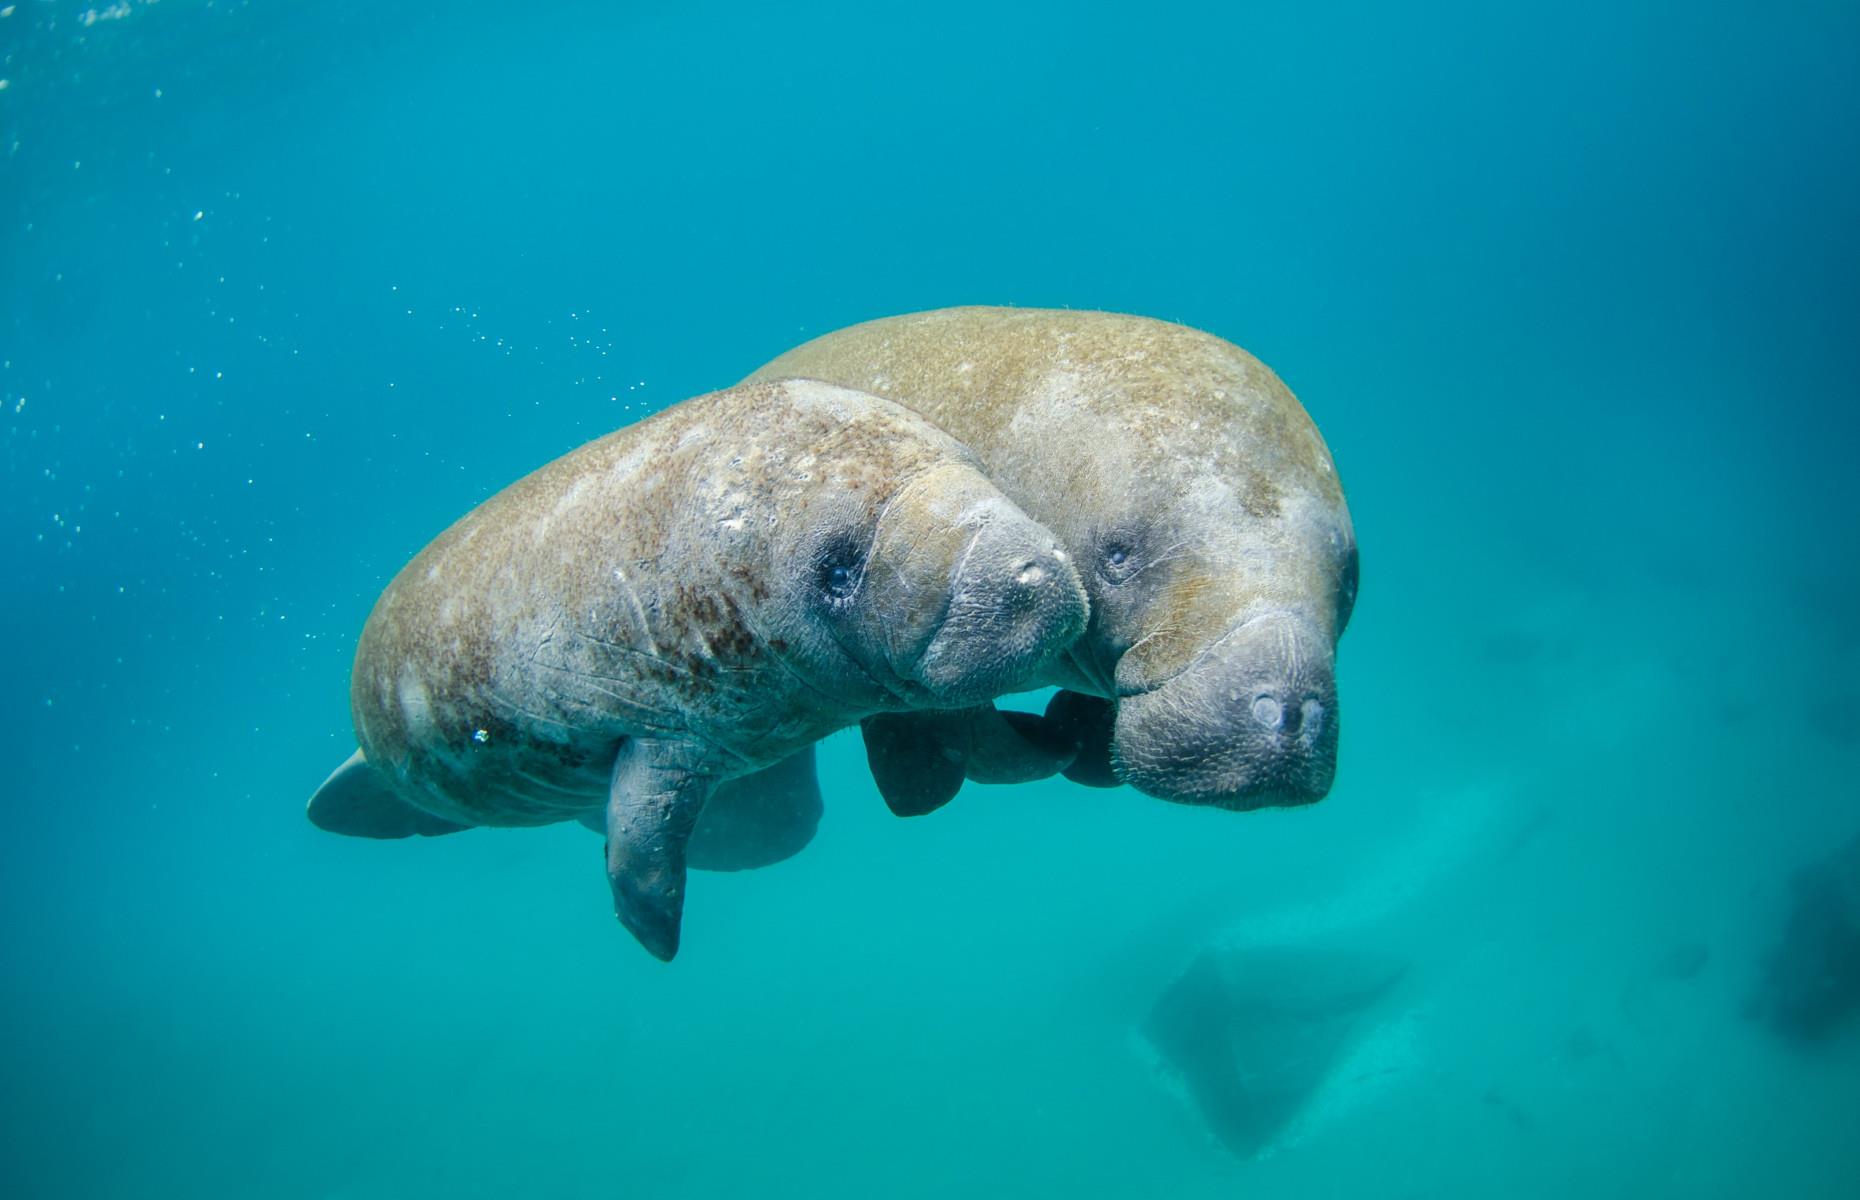 <p>Each year when winter cools the temperature, thousands of manatees spend months swimming in Florida's natural springs. These calm bodies of water remain a warm temperature year-round, offering a snug space for these gentle creatures to relax. You can even swim with them legally in Crystal River. Remember, no high-fives or hugs allowed!</p>